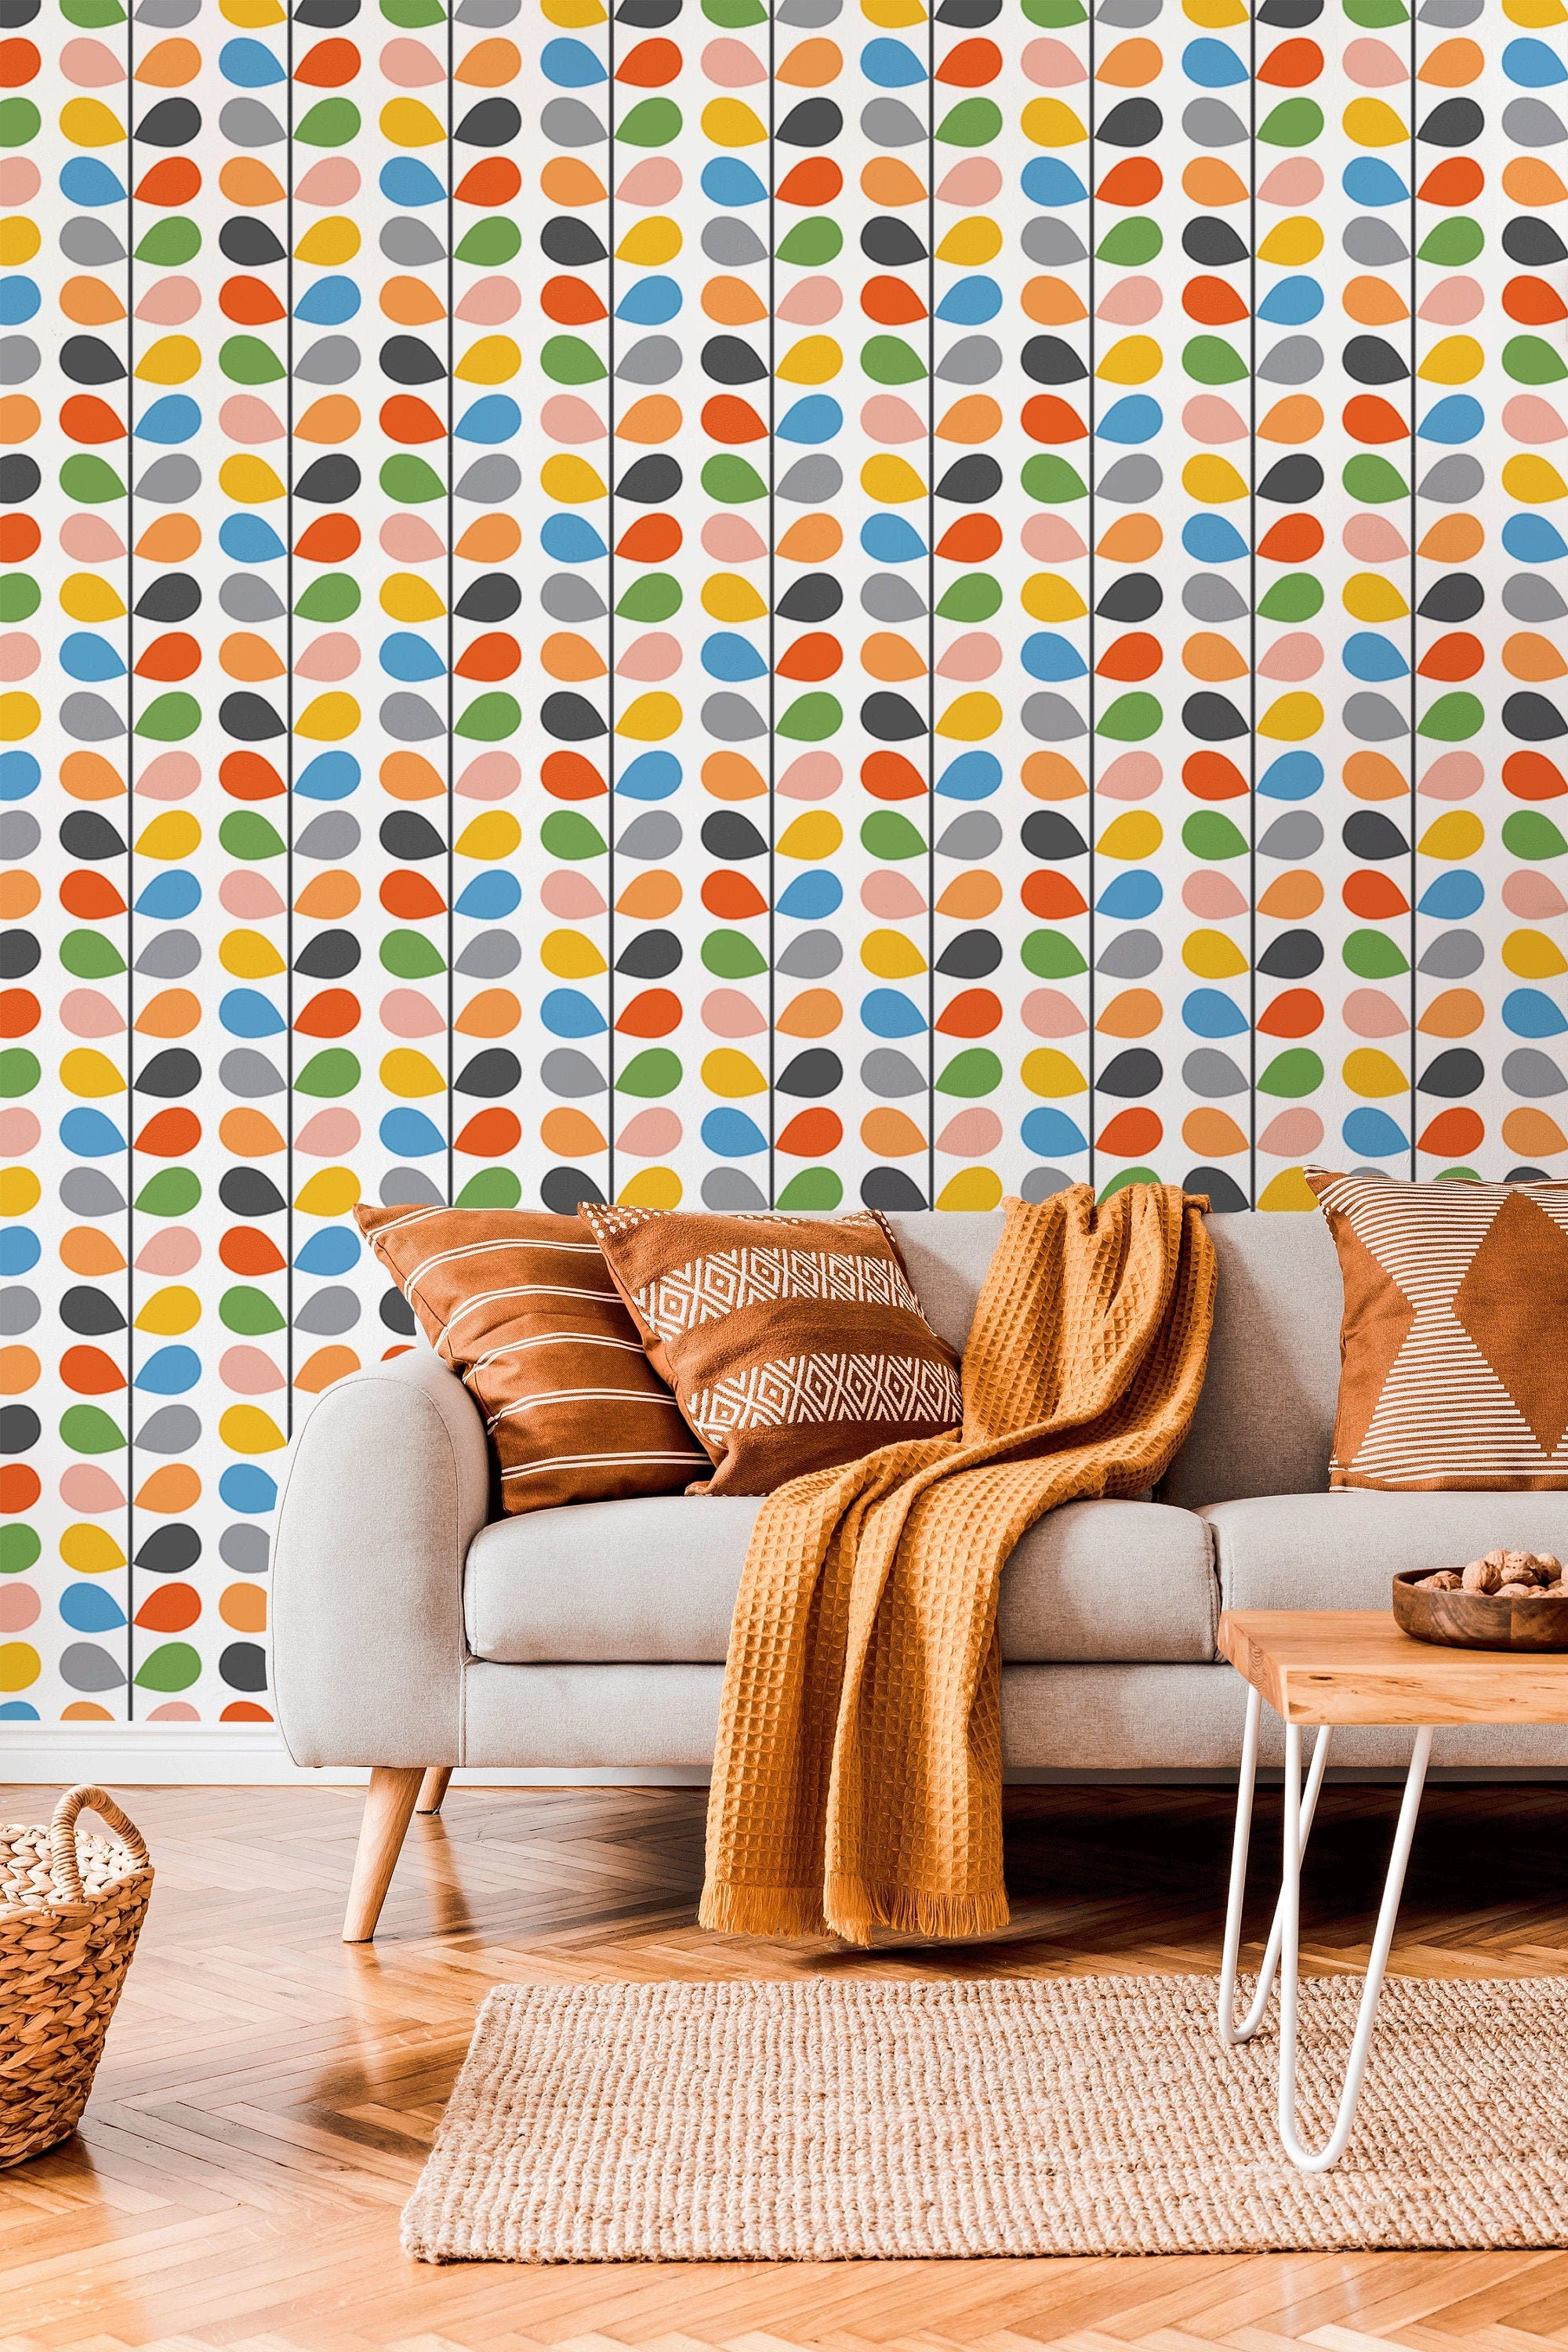 Buy Retro Peel and Stick Wallpaper Online In India  Etsy India